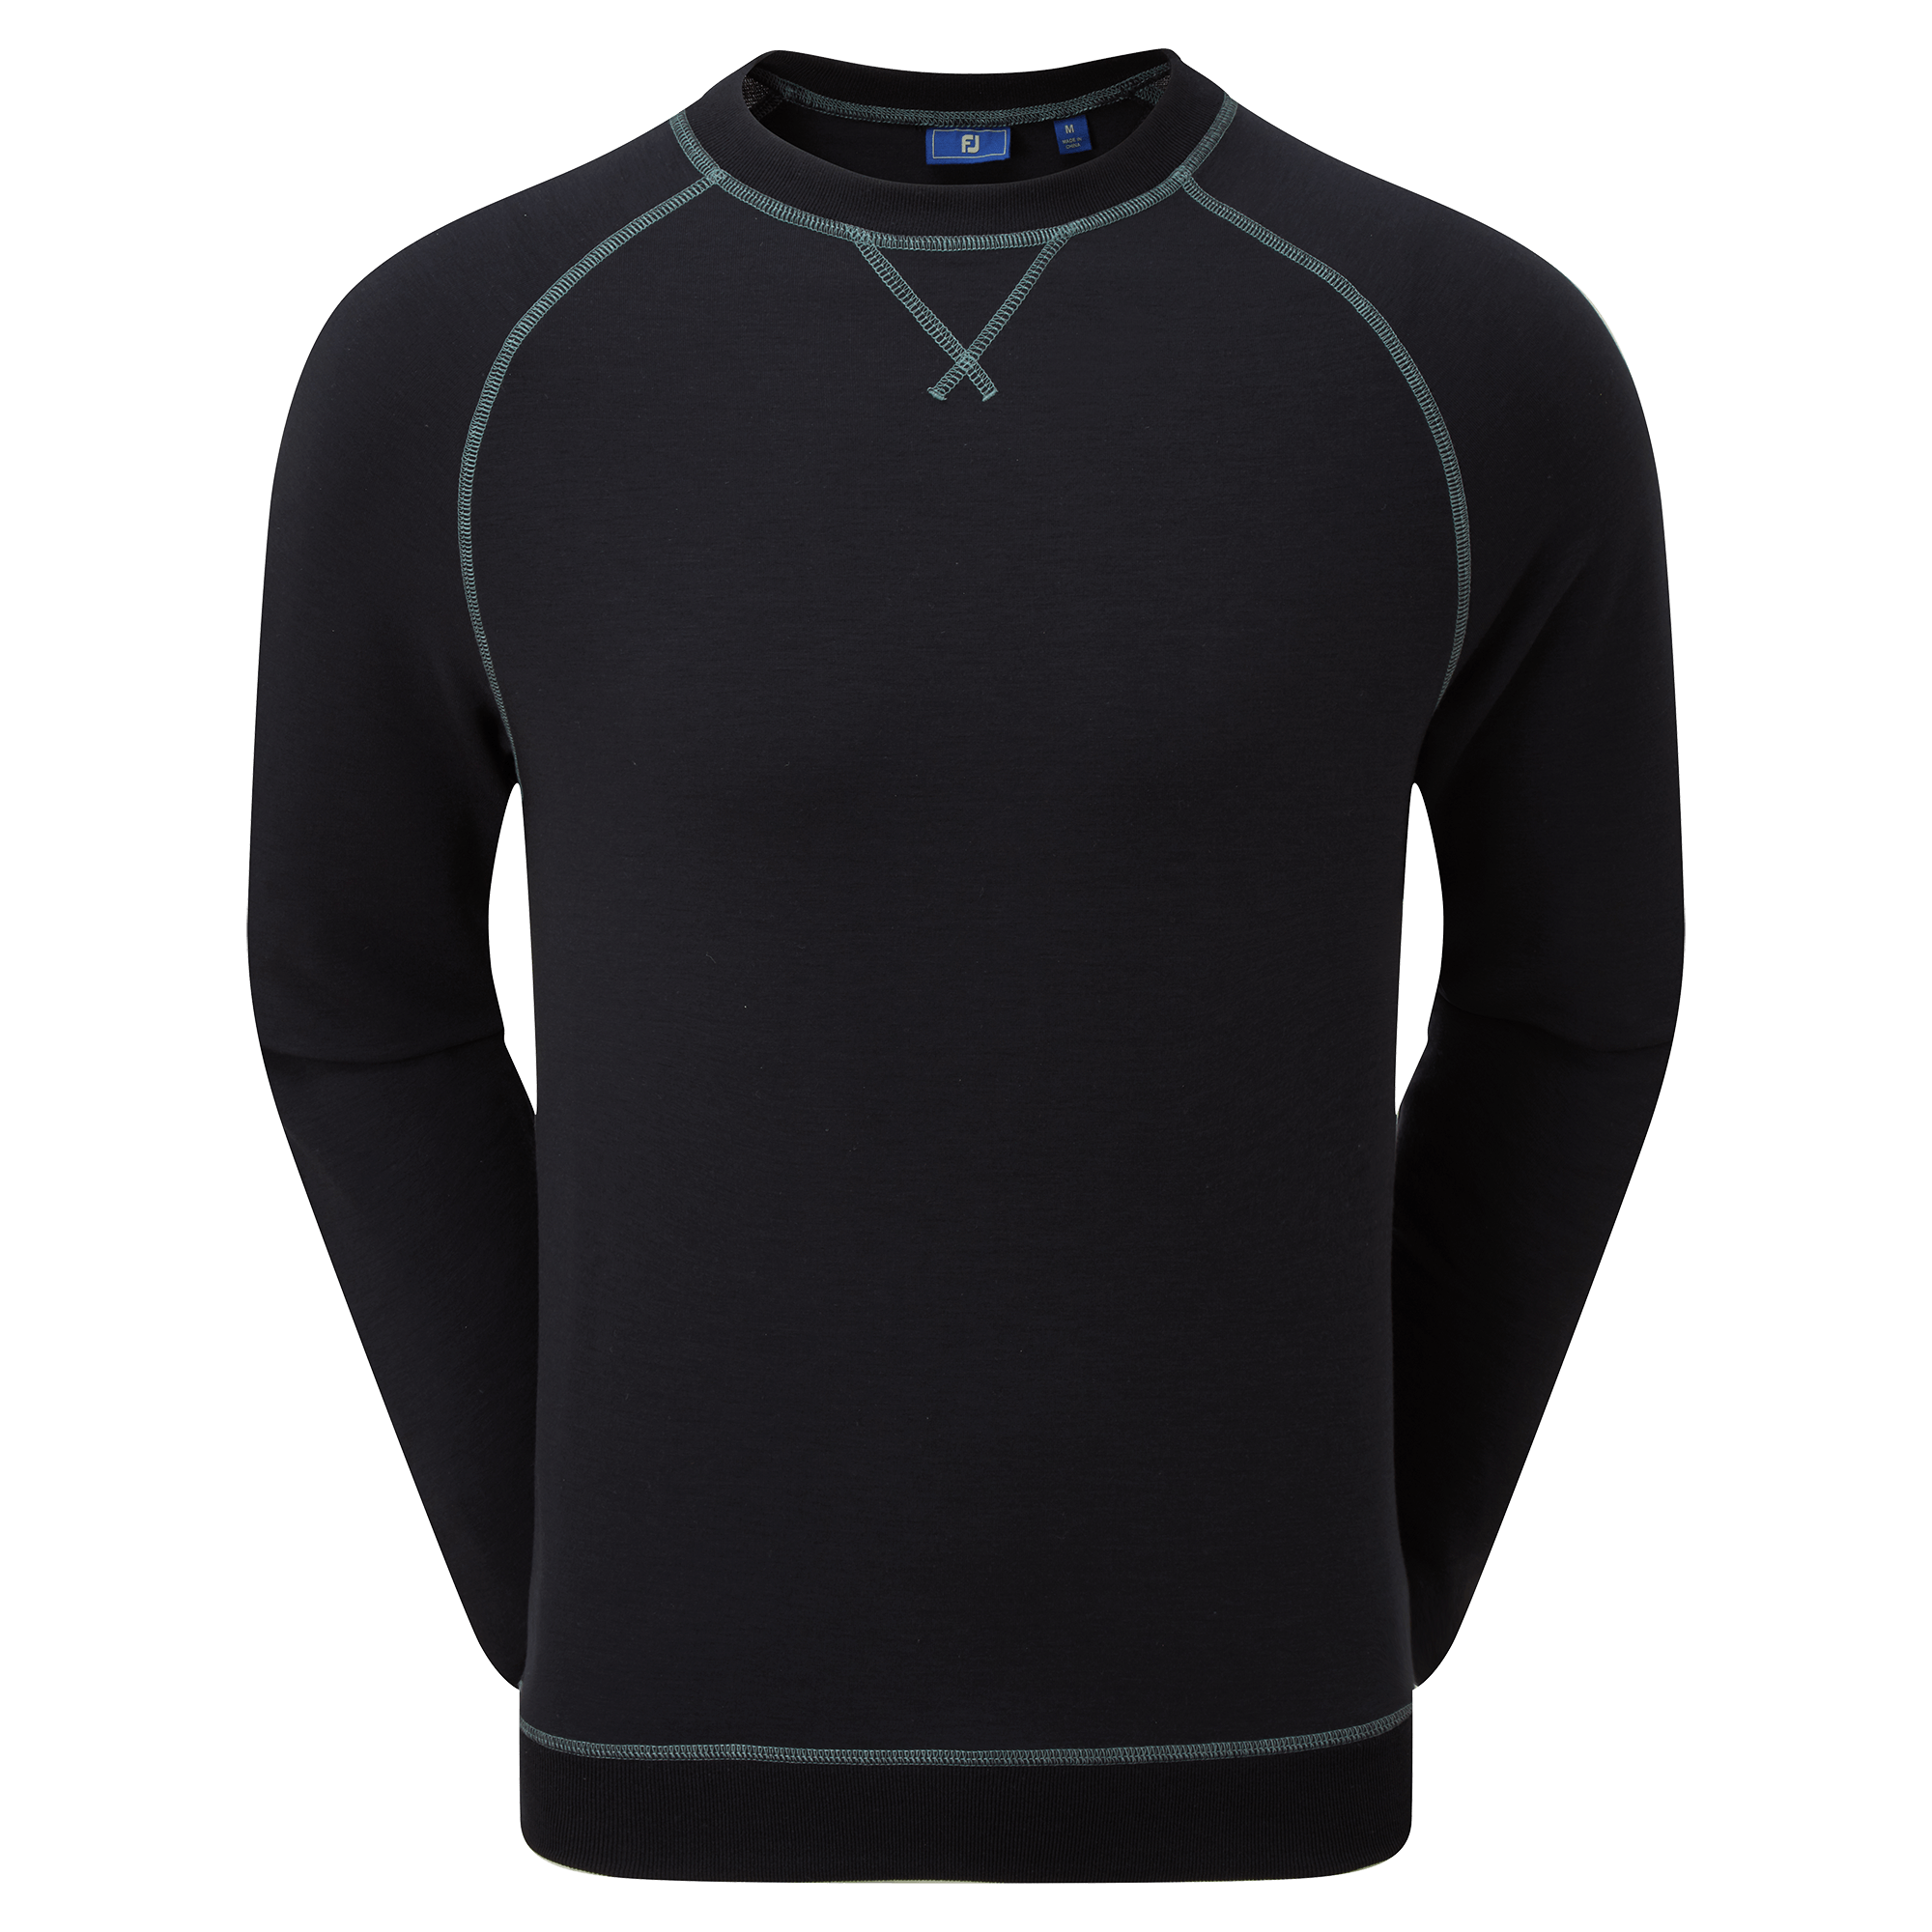 FootJoy Dri-Release French Terry Crew Neck Sweater